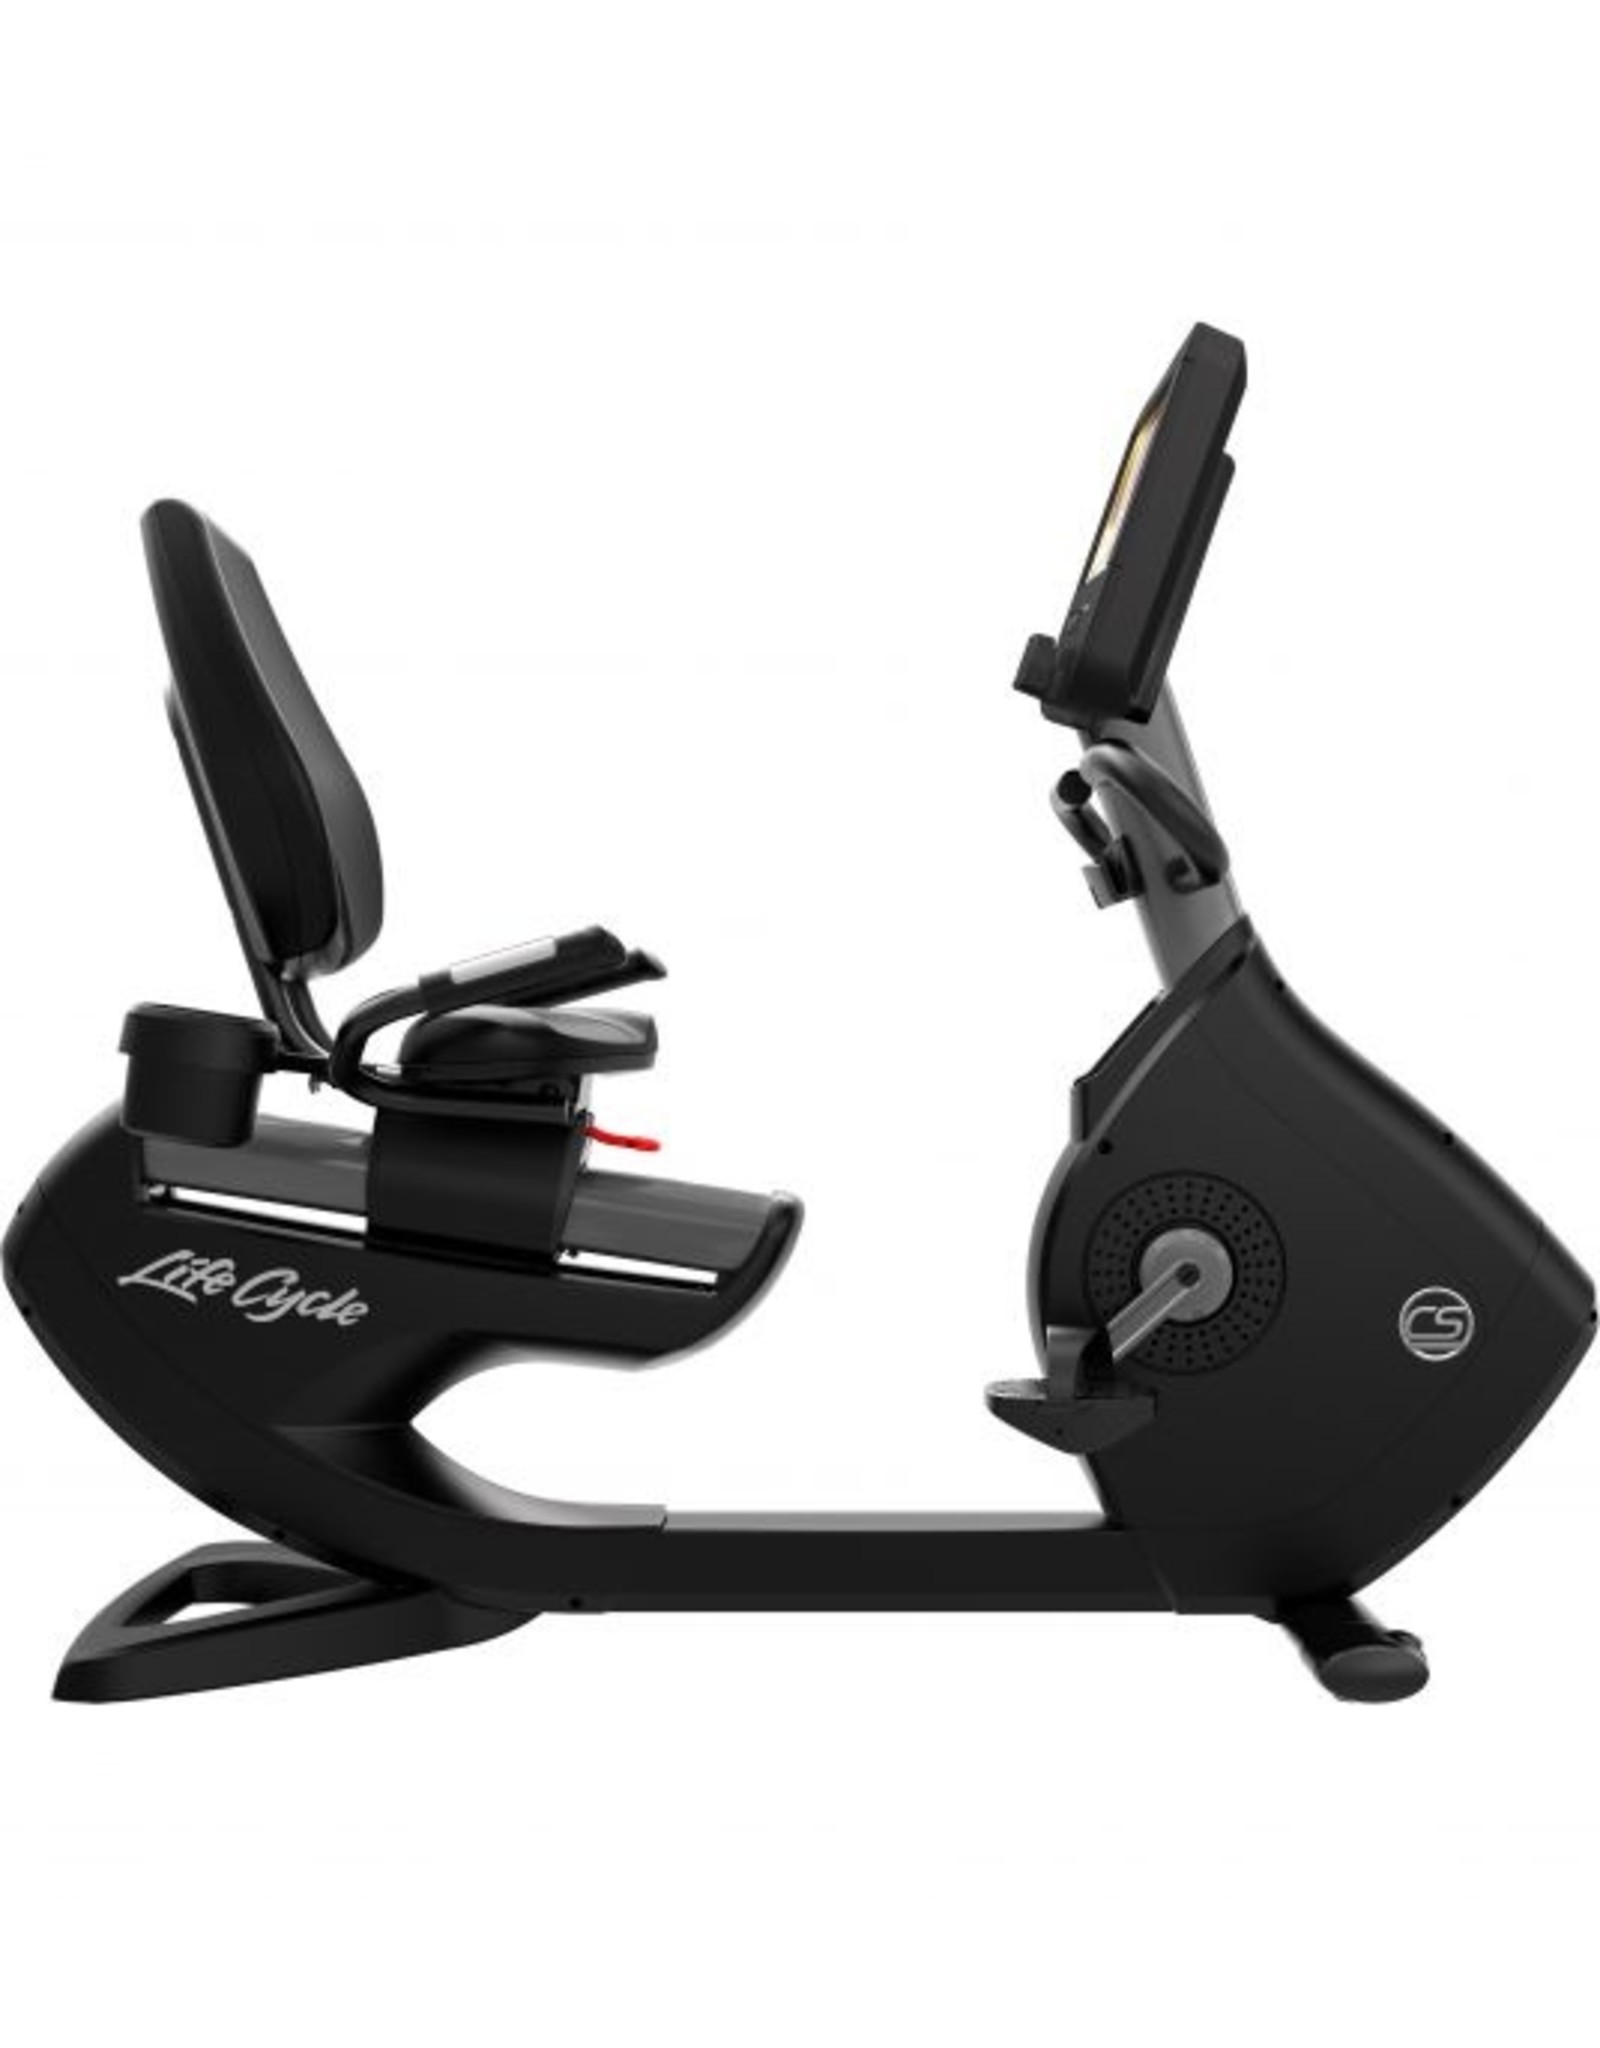 Life Fitness Life Fitness Platinum Club Series Lifecycle recumbent bike met Discover SE3HD Console in Titanium Storm